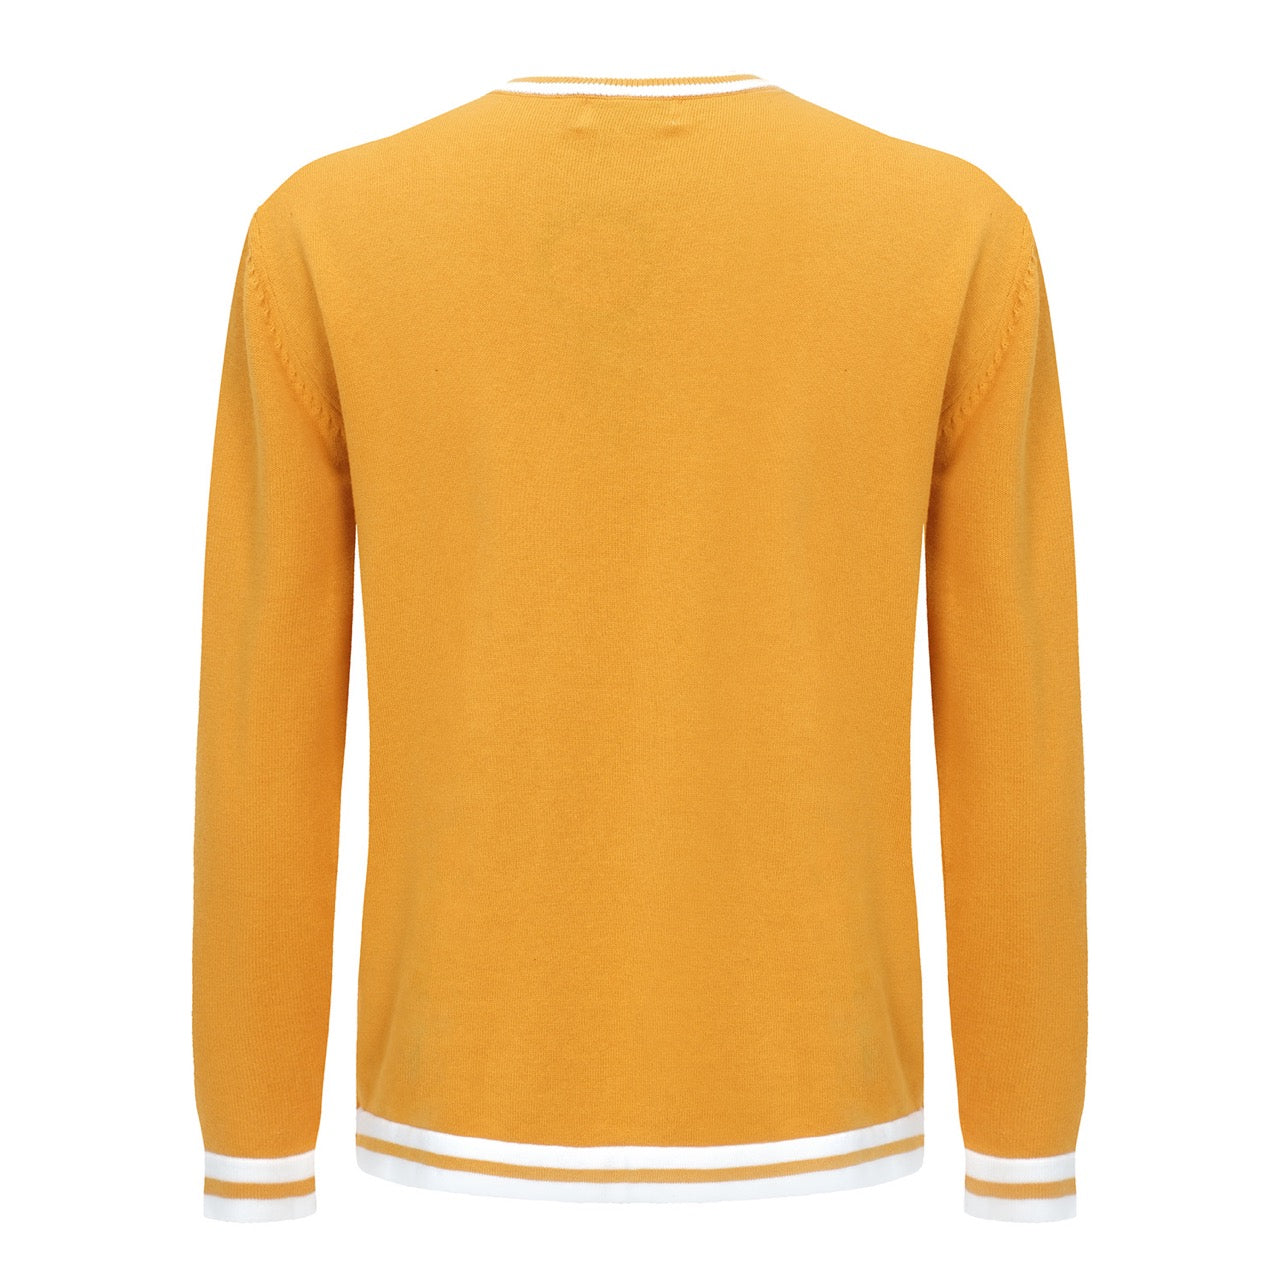 Men's Yellow Knitted Long Sleeve Solid T-Shirt